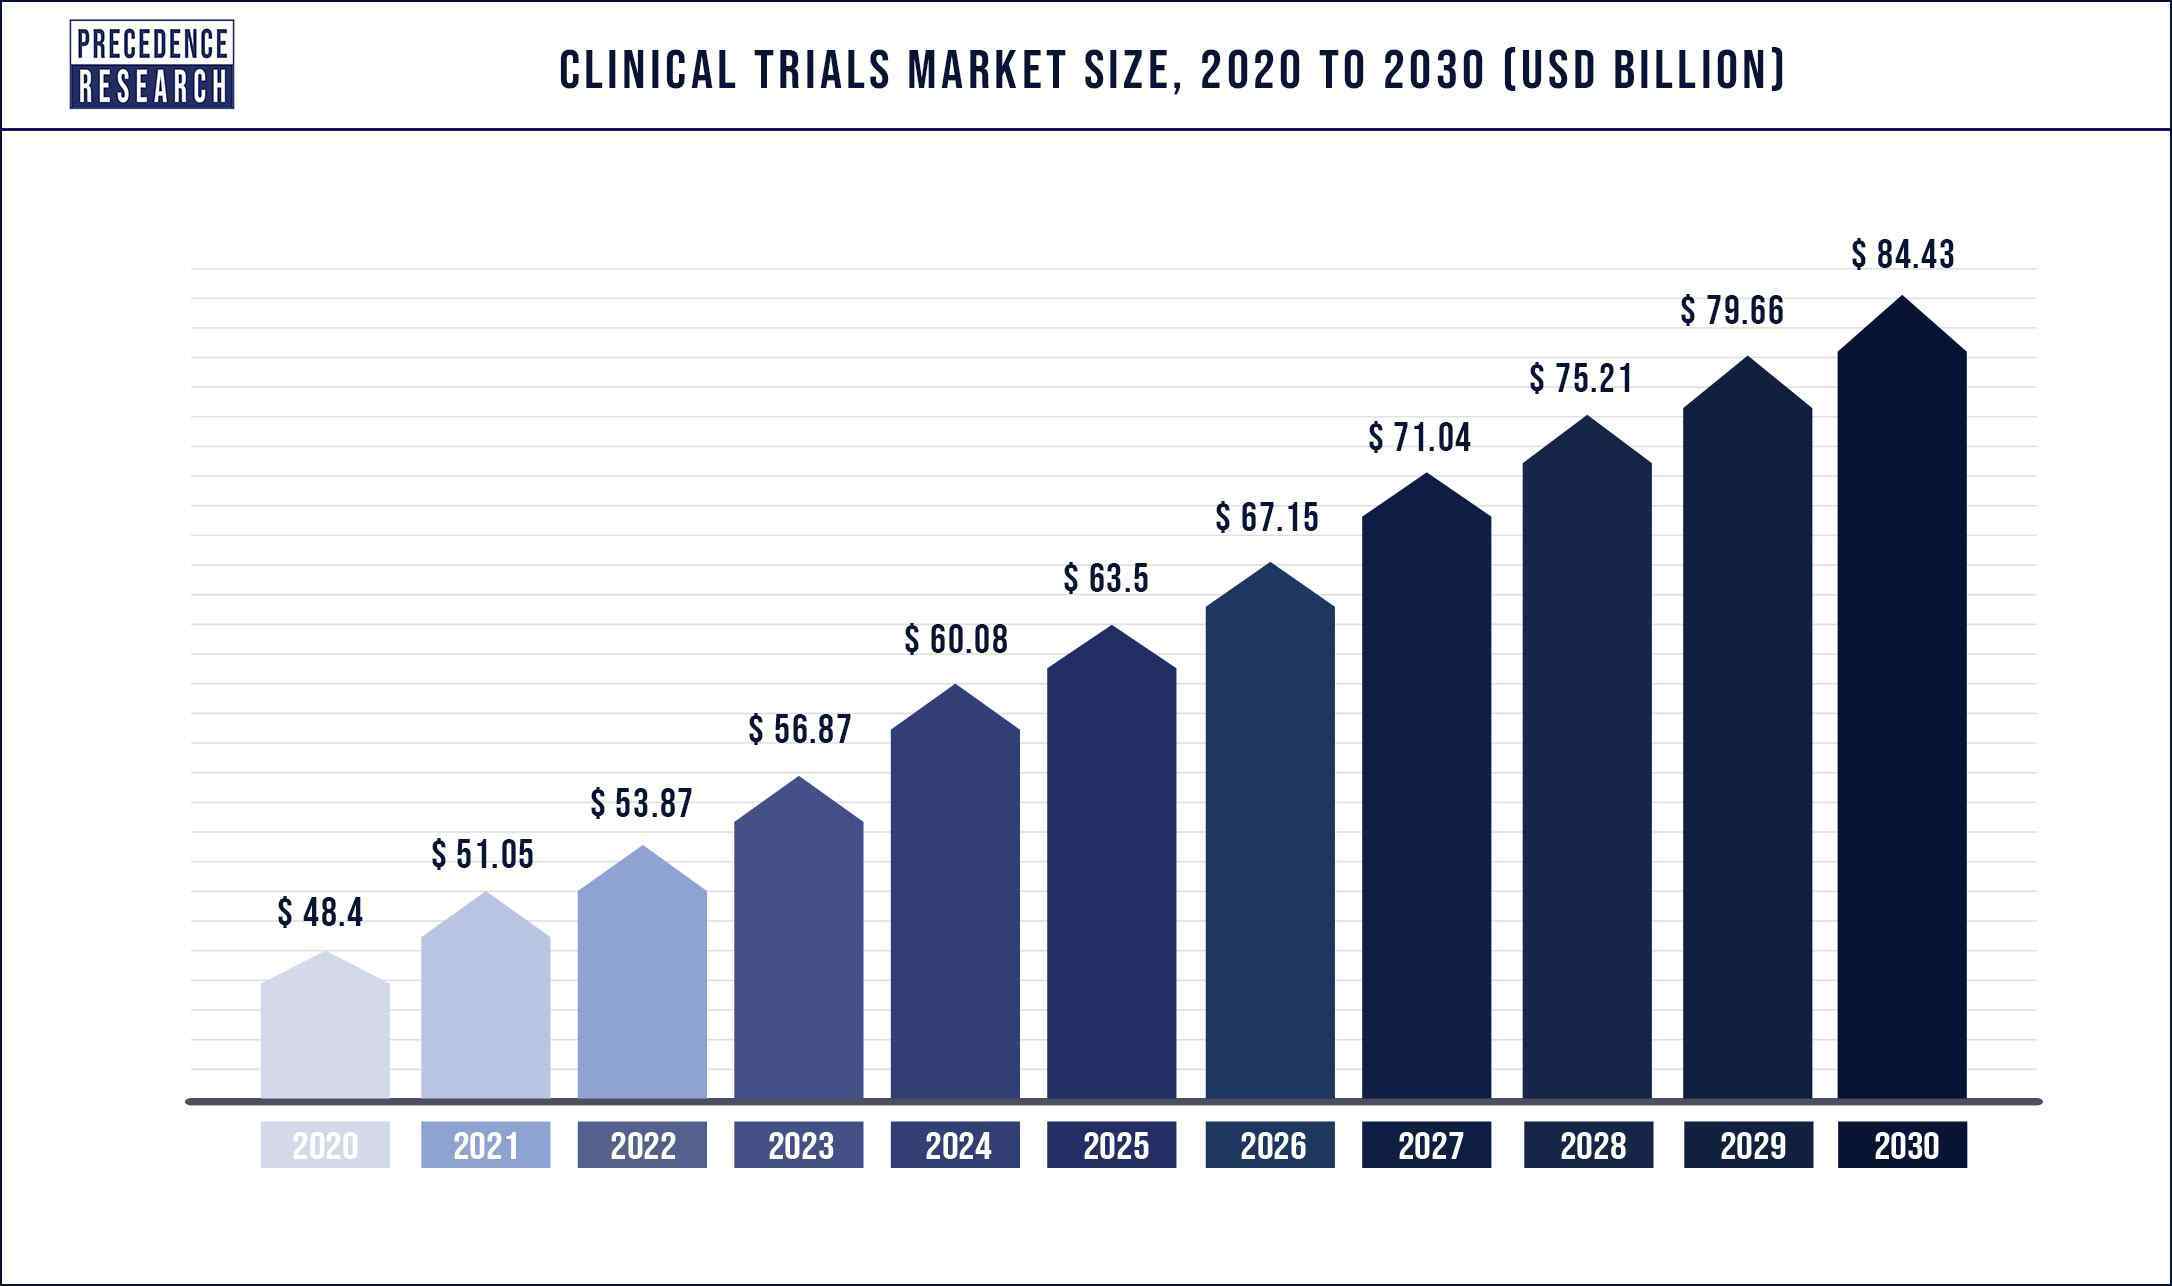 Clinical Market Size 220 to 2030 image.